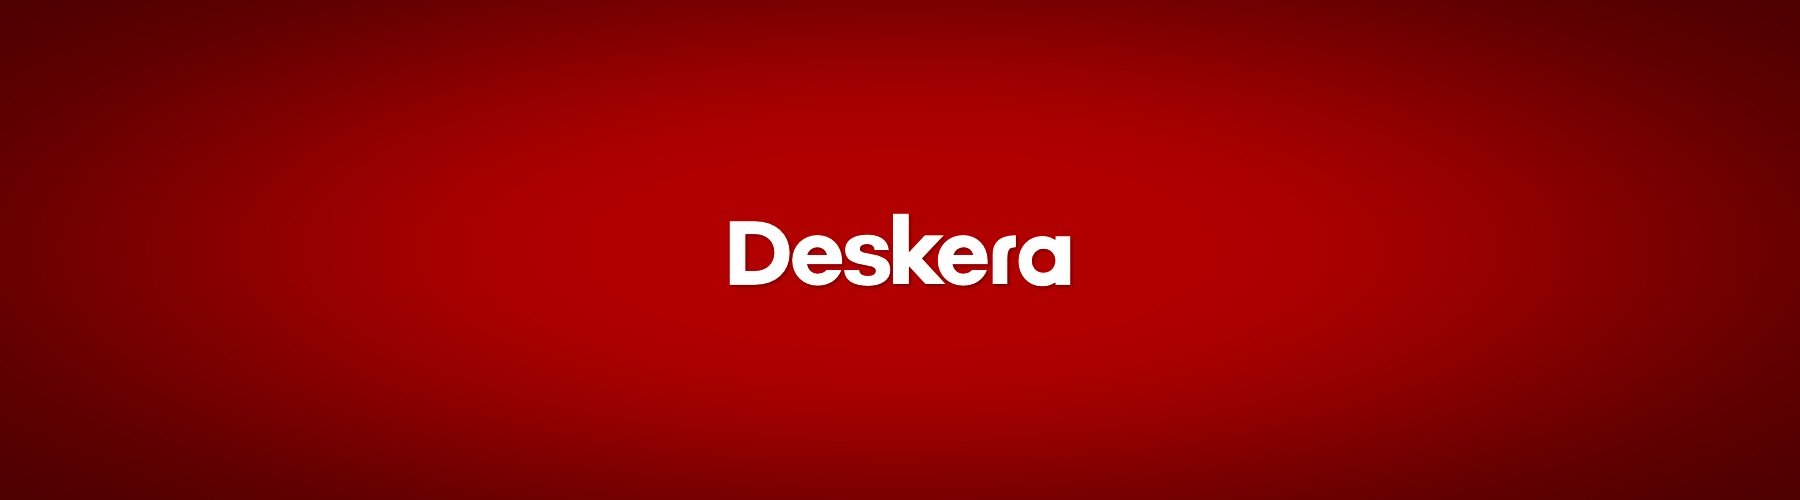 Checking Resource Availability with Deskera Open Source Project Management